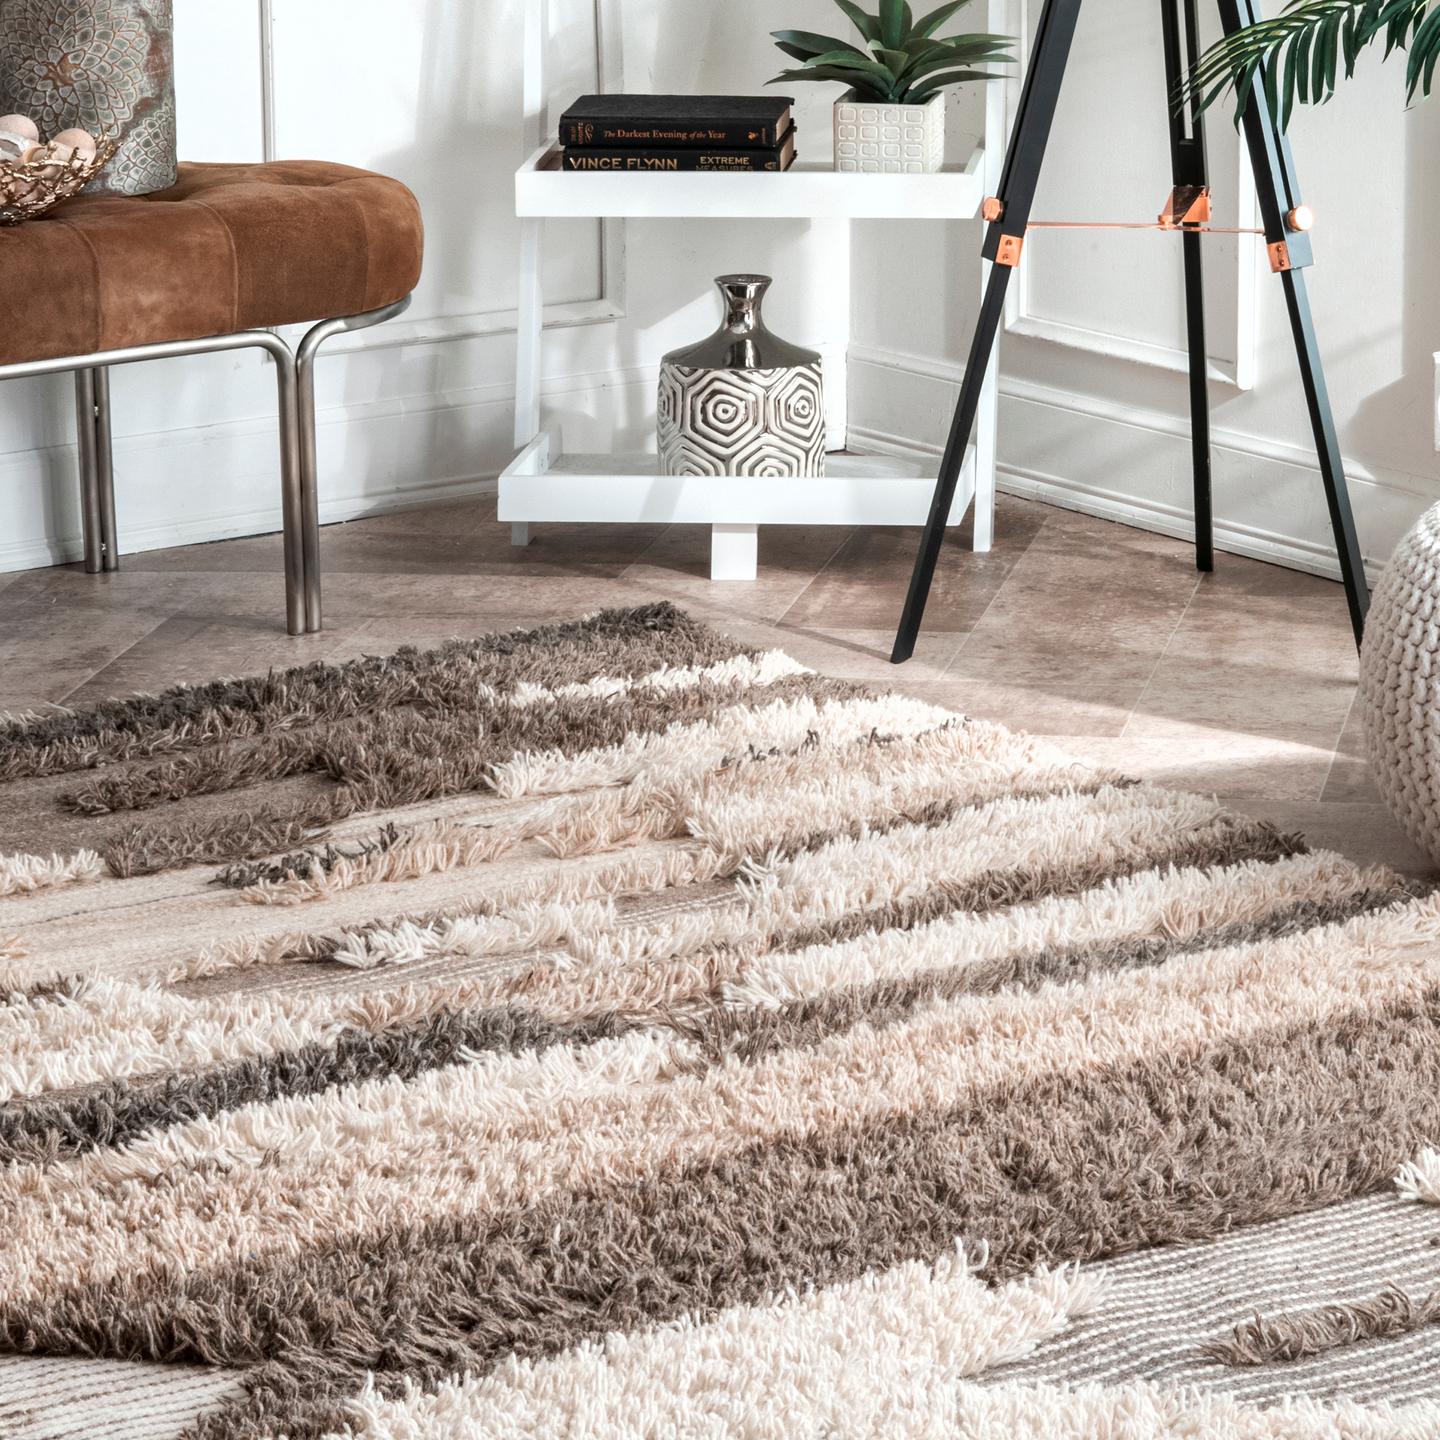 Nuloom Zora Ombre Nzo3324A Brown Area Rug